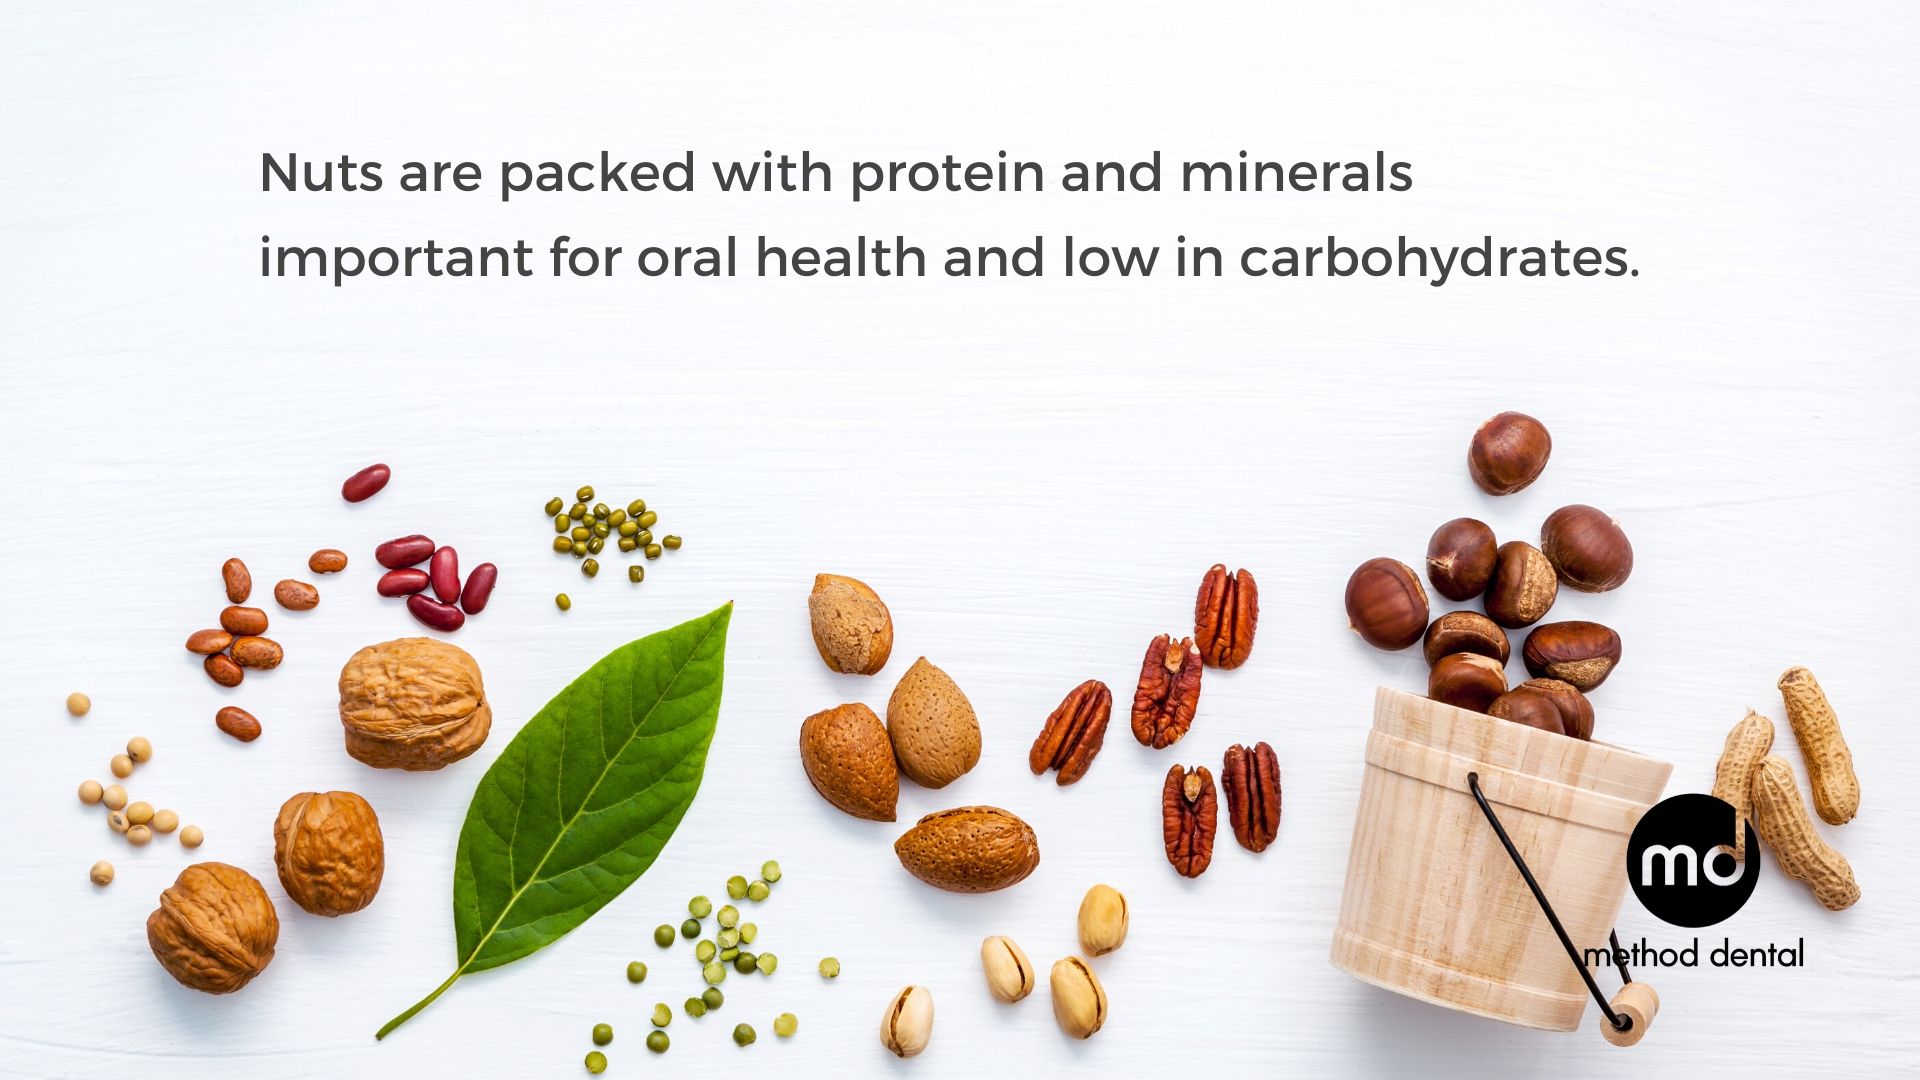 Nuts laid flat that are healthy for teeth as snacks